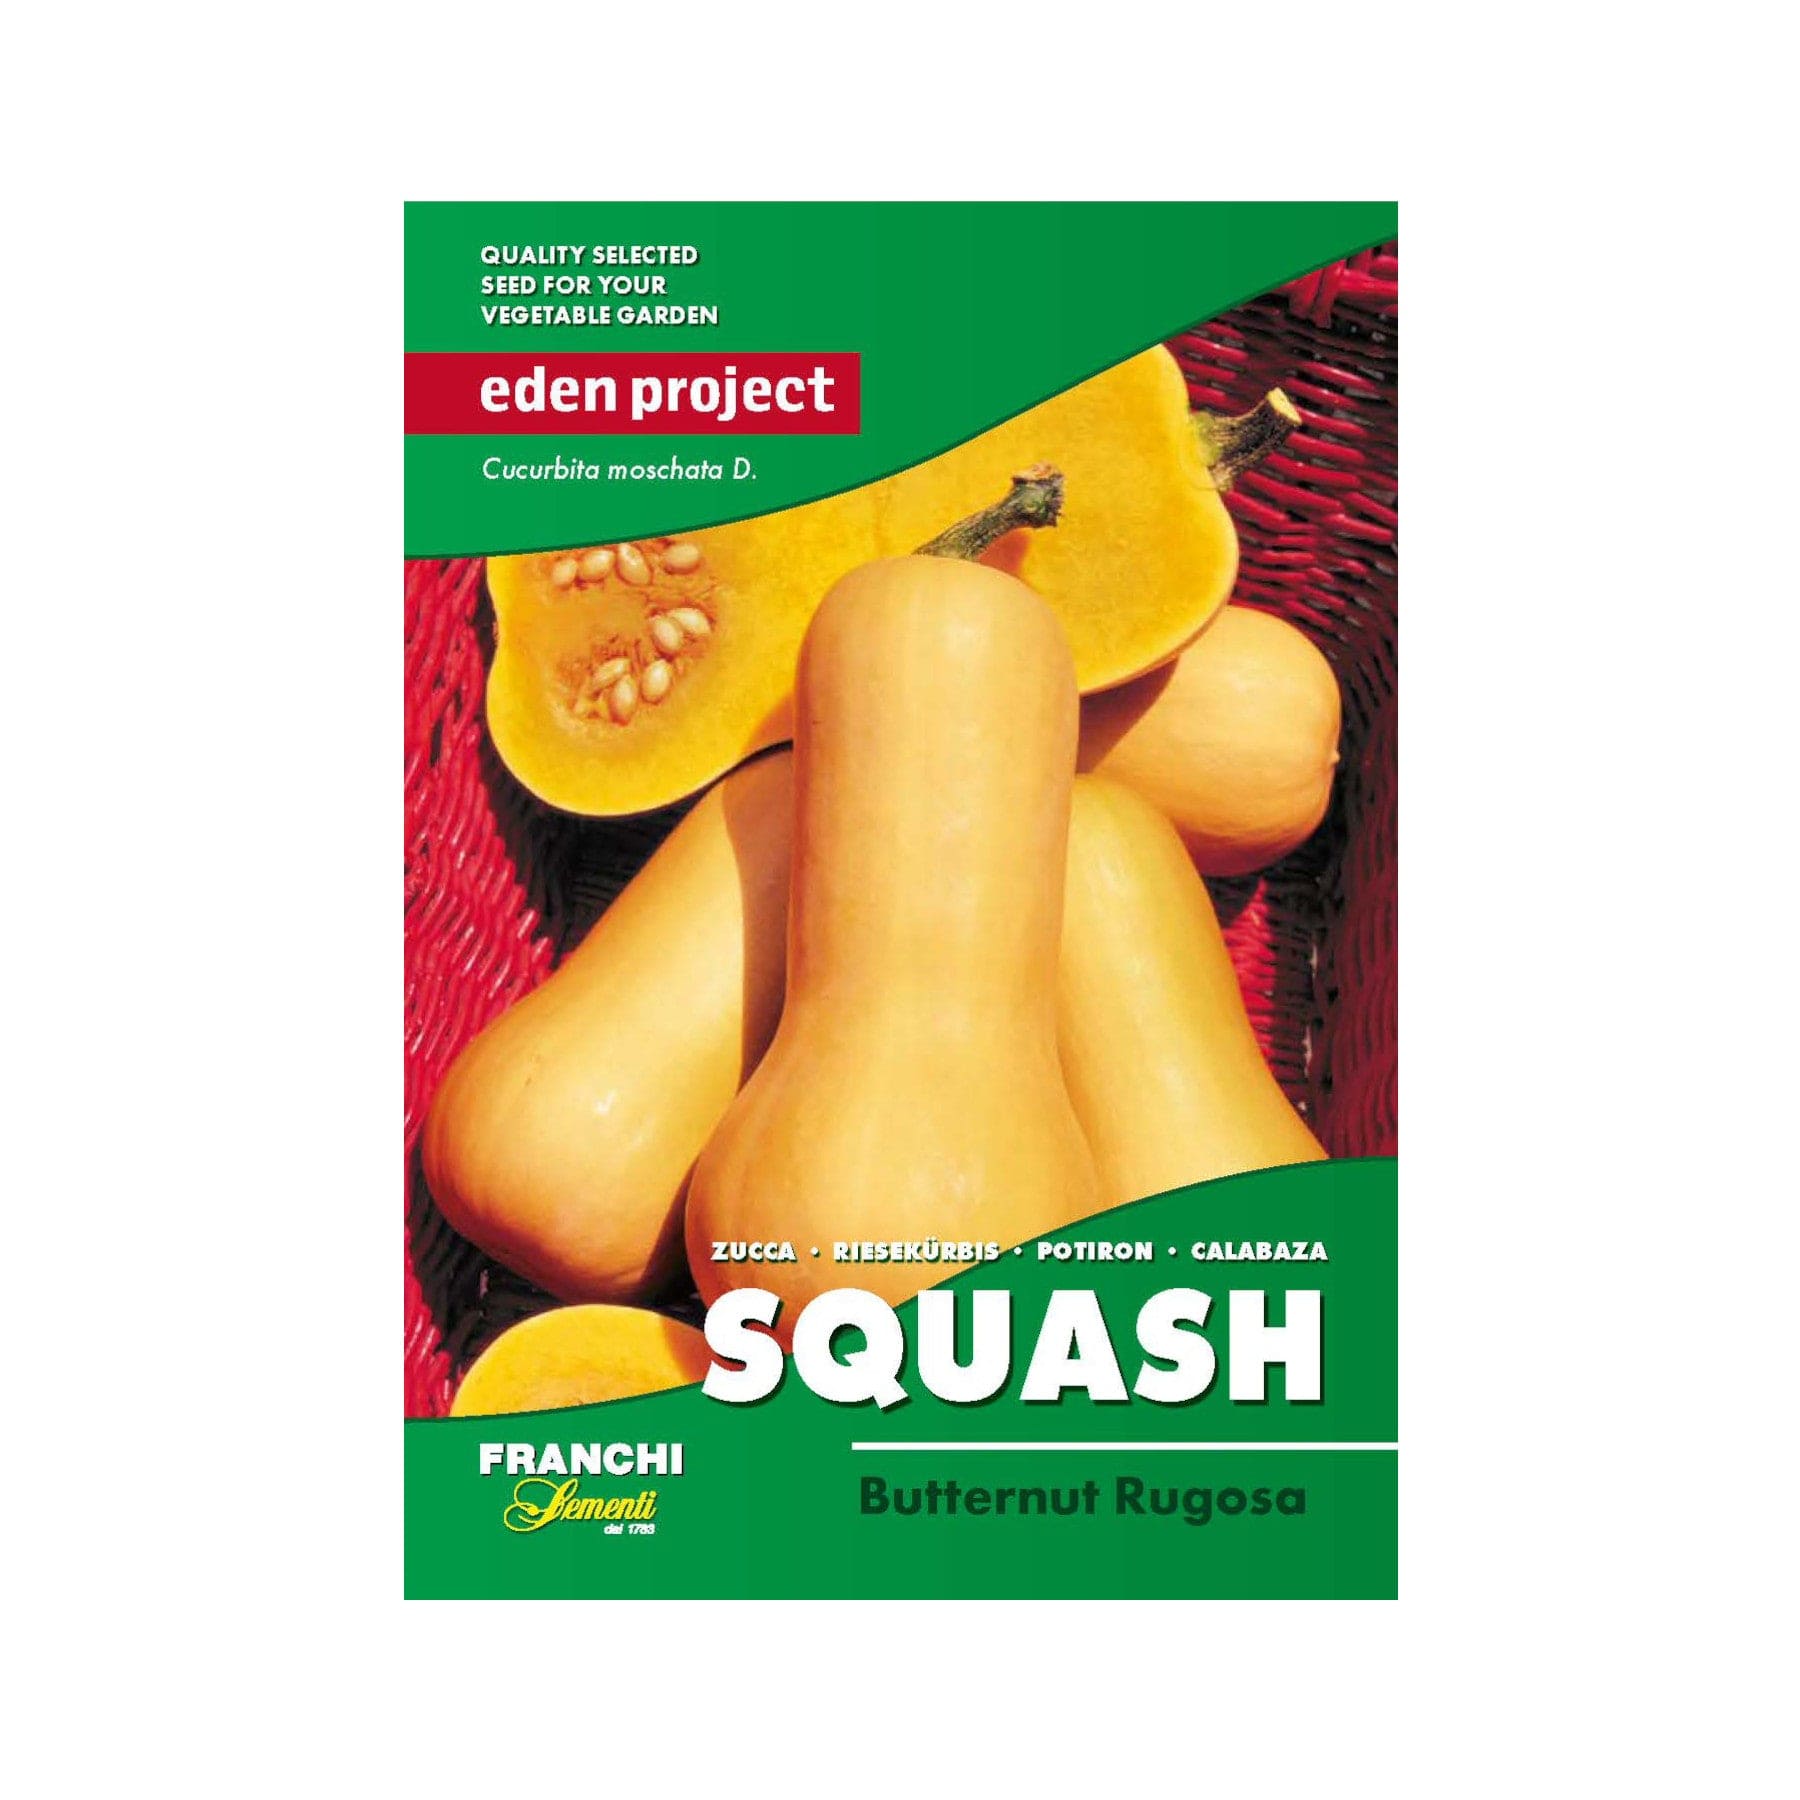 Butternut Rugosa squash seed packet by Franchi Sementi, displaying quality selected seeds for vegetable garden, Eden Project Cucurbita moschata D, whole and sliced squash with visible seeds.